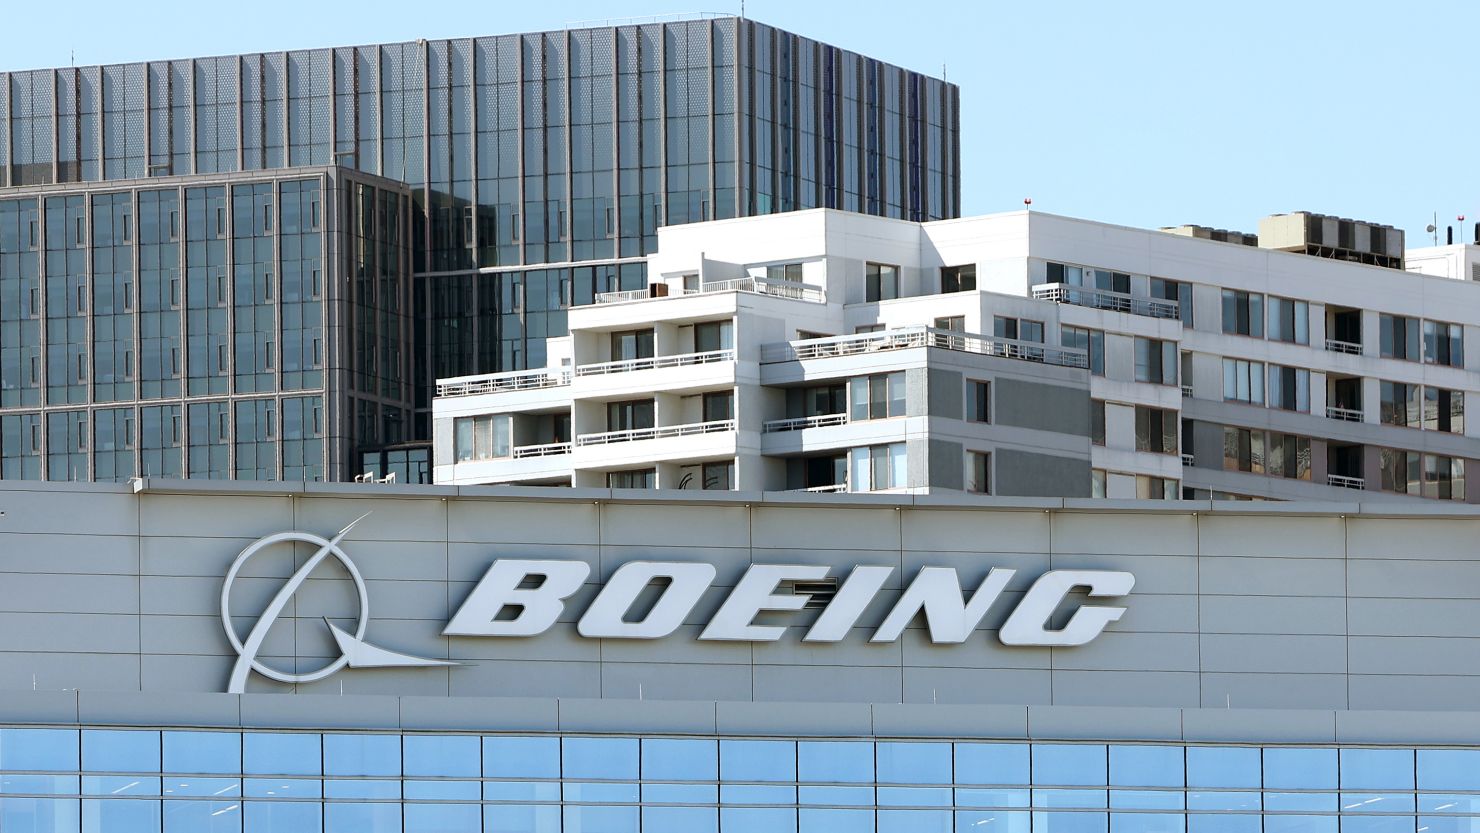 ARLINGTON, VIRGINIA - MARCH 25: The exterior of the Boeing Company headquarters is seen on March 25, 2024 in Arlington, Virginia. Boeing CEO Dave Calhoun announced he intends to leave the company by the end of the year in the wake of ongoing safety concerns with the company's jetliners. Boeingâs chairman Larry Kellner and the head of the commercial airplane unit, Stan Deal, are also exiting. (Photo by Kevin Dietsch/Getty Images)